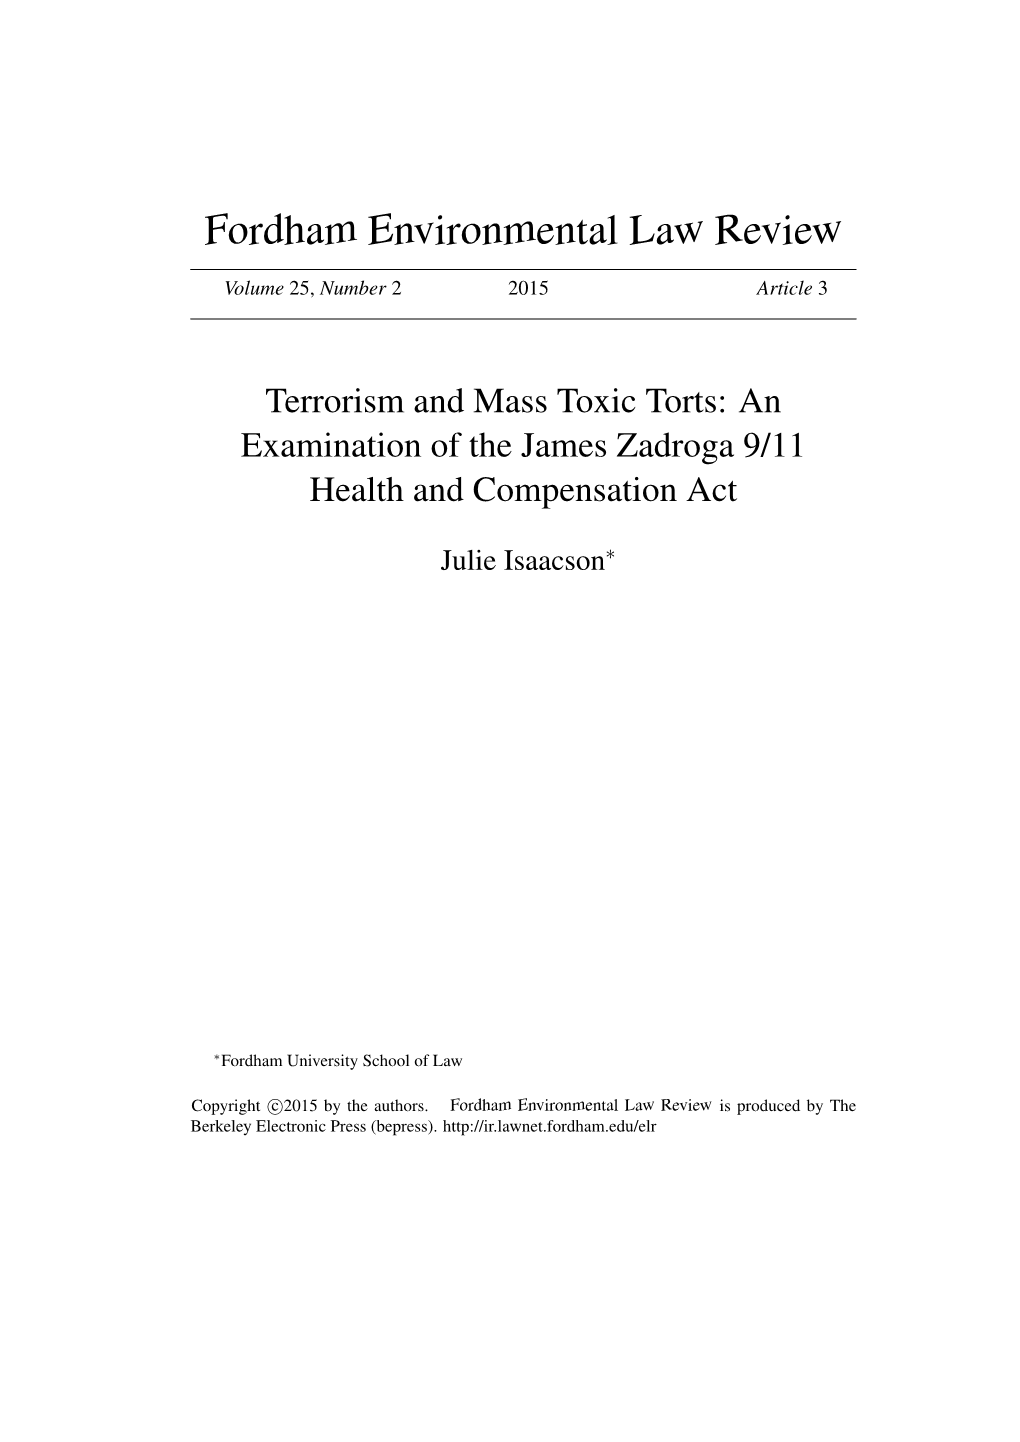 Terrorism and Mass Toxic Torts: an Examination of the James Zadroga 9/11 Health and Compensation Act